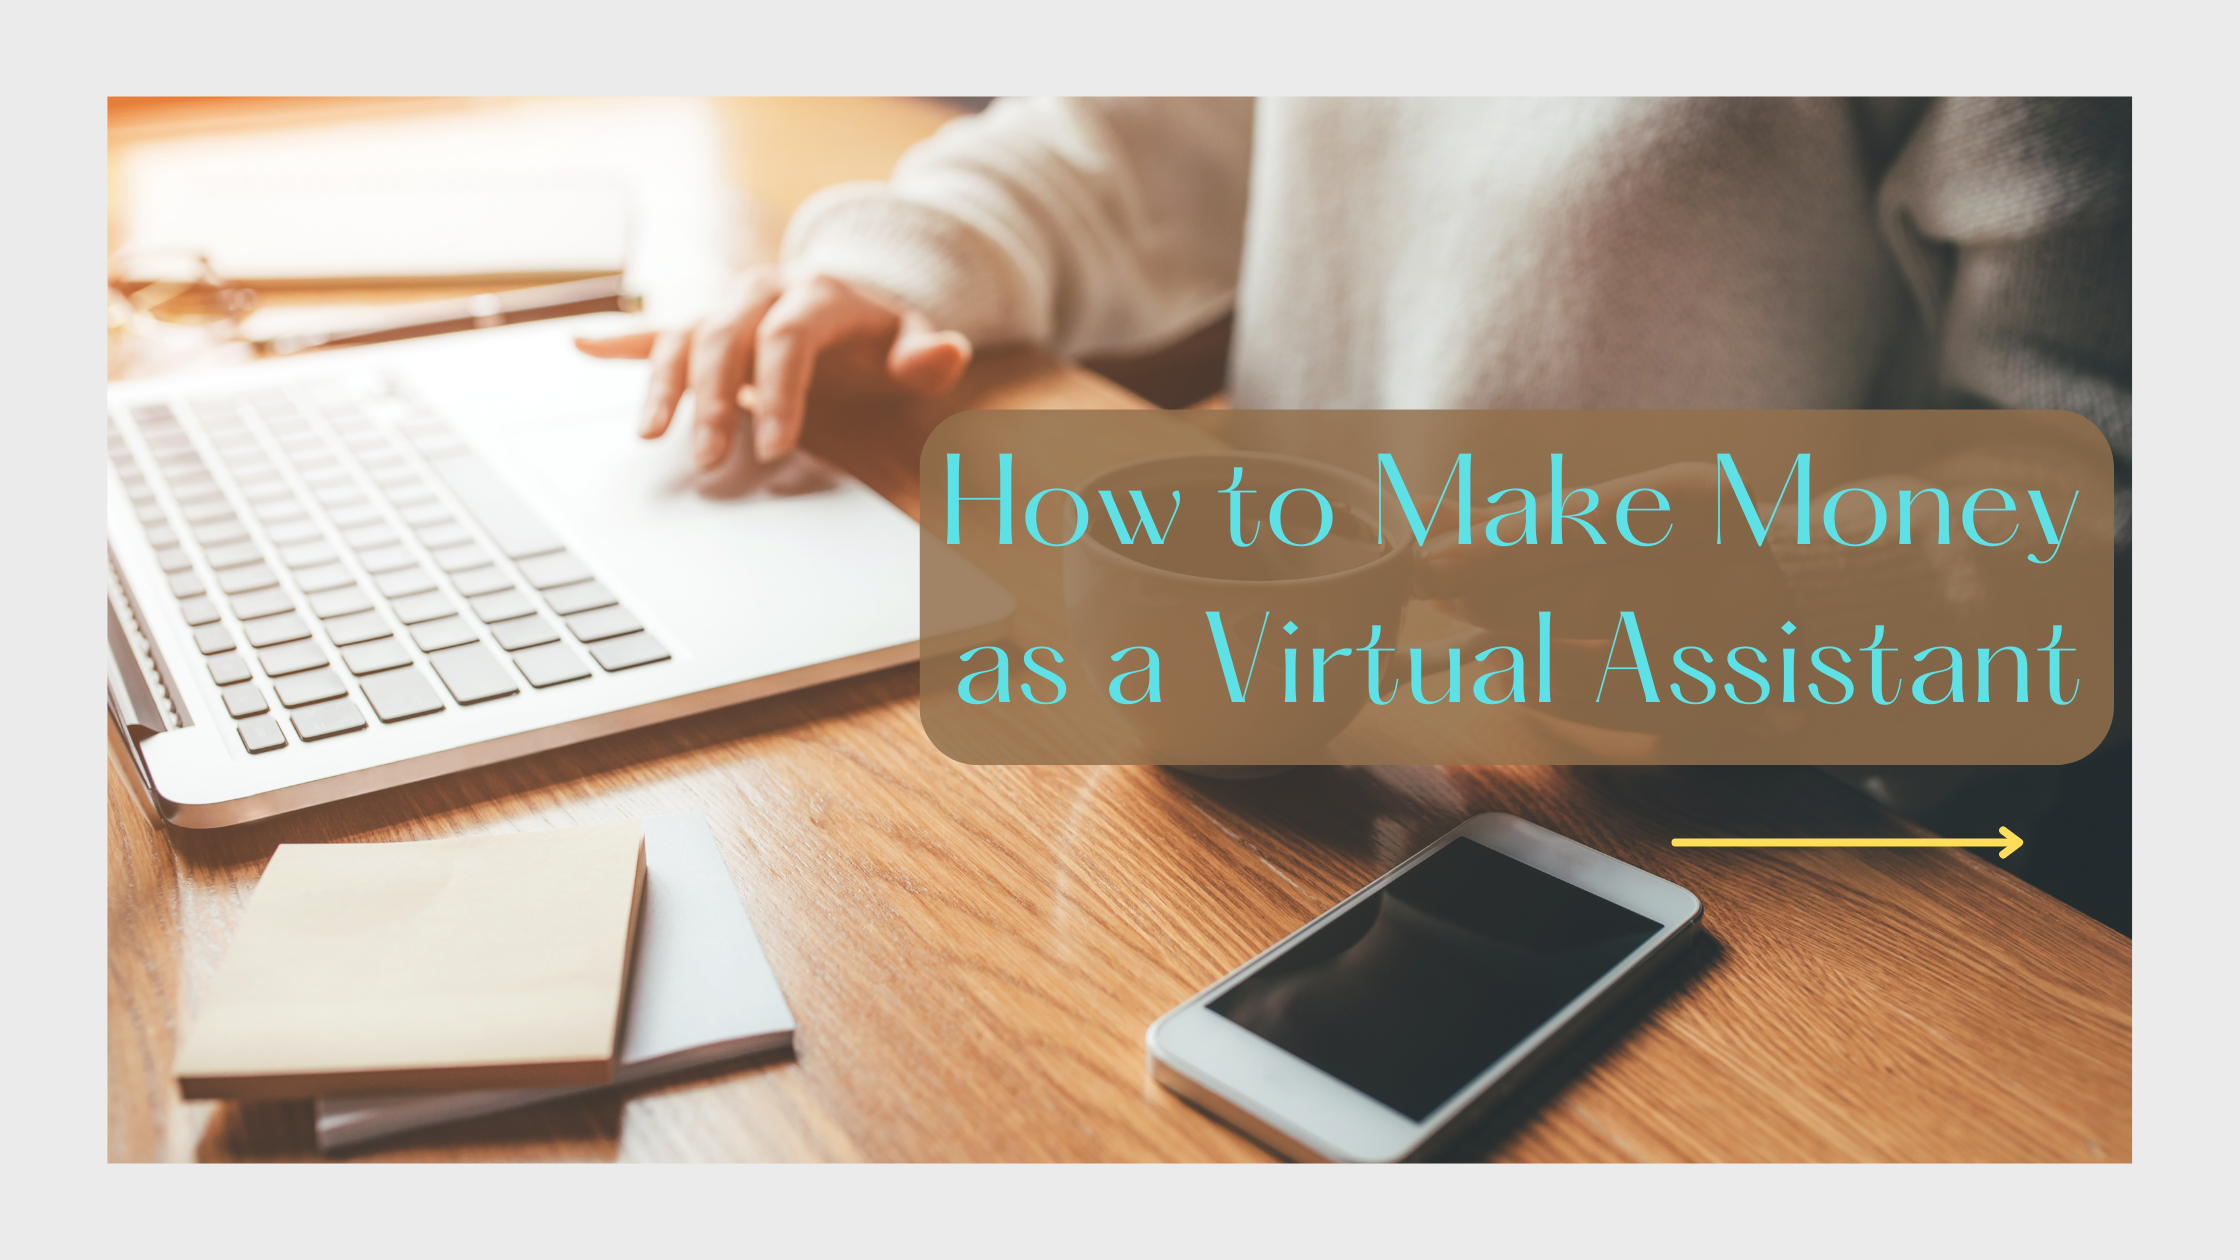 How to make money as a virtual assistant